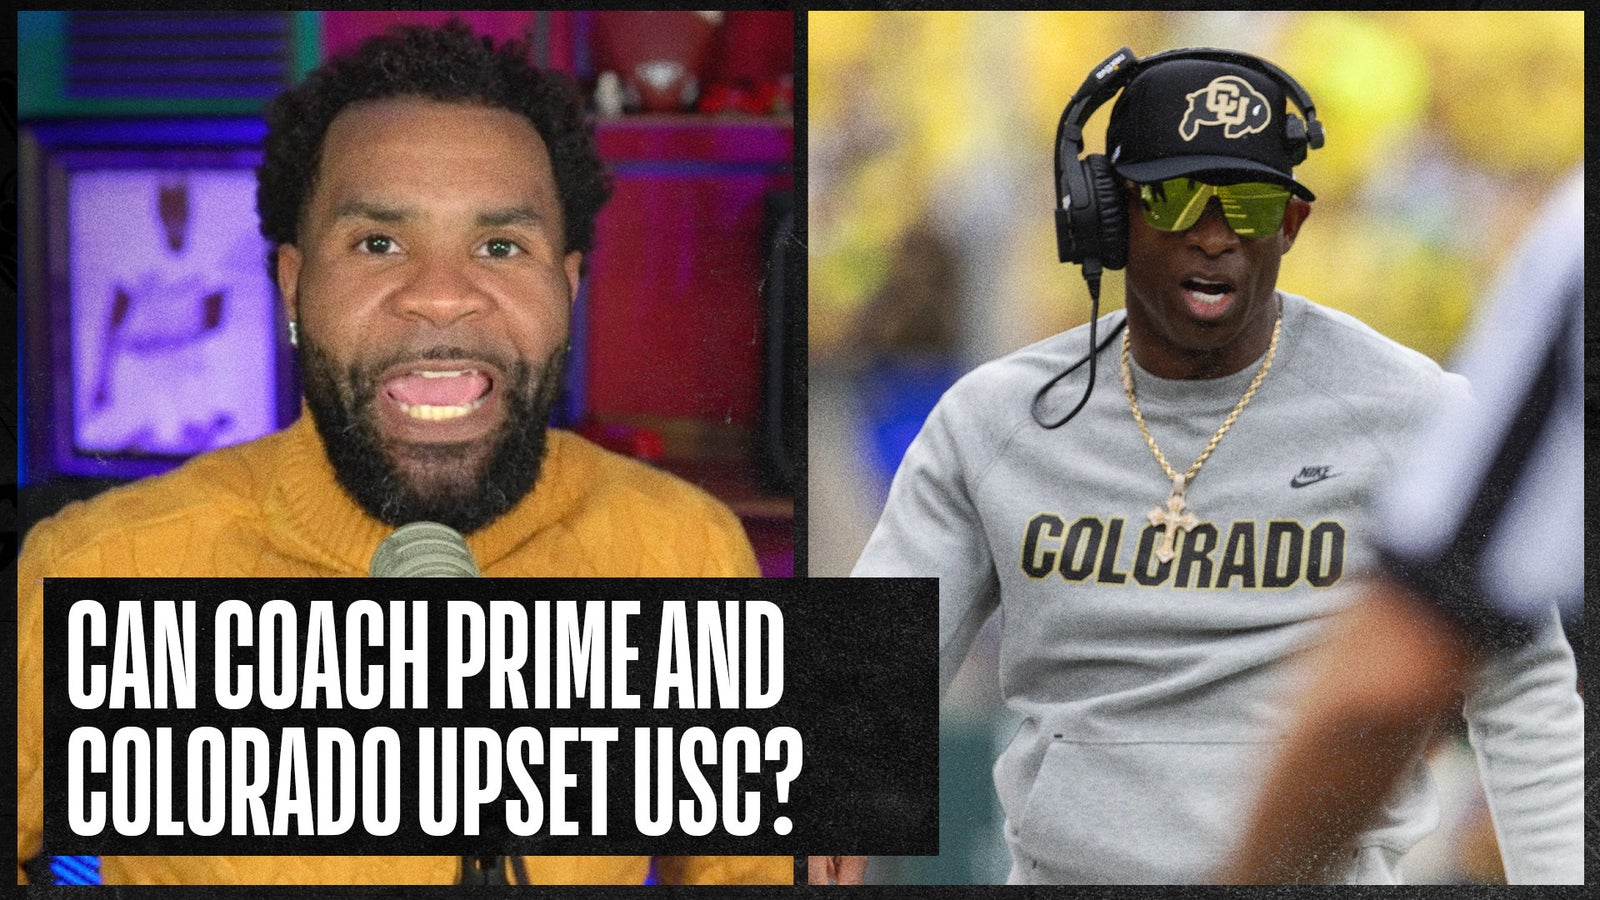 Can Coach Prime, Colorado pull off the upset against USC?